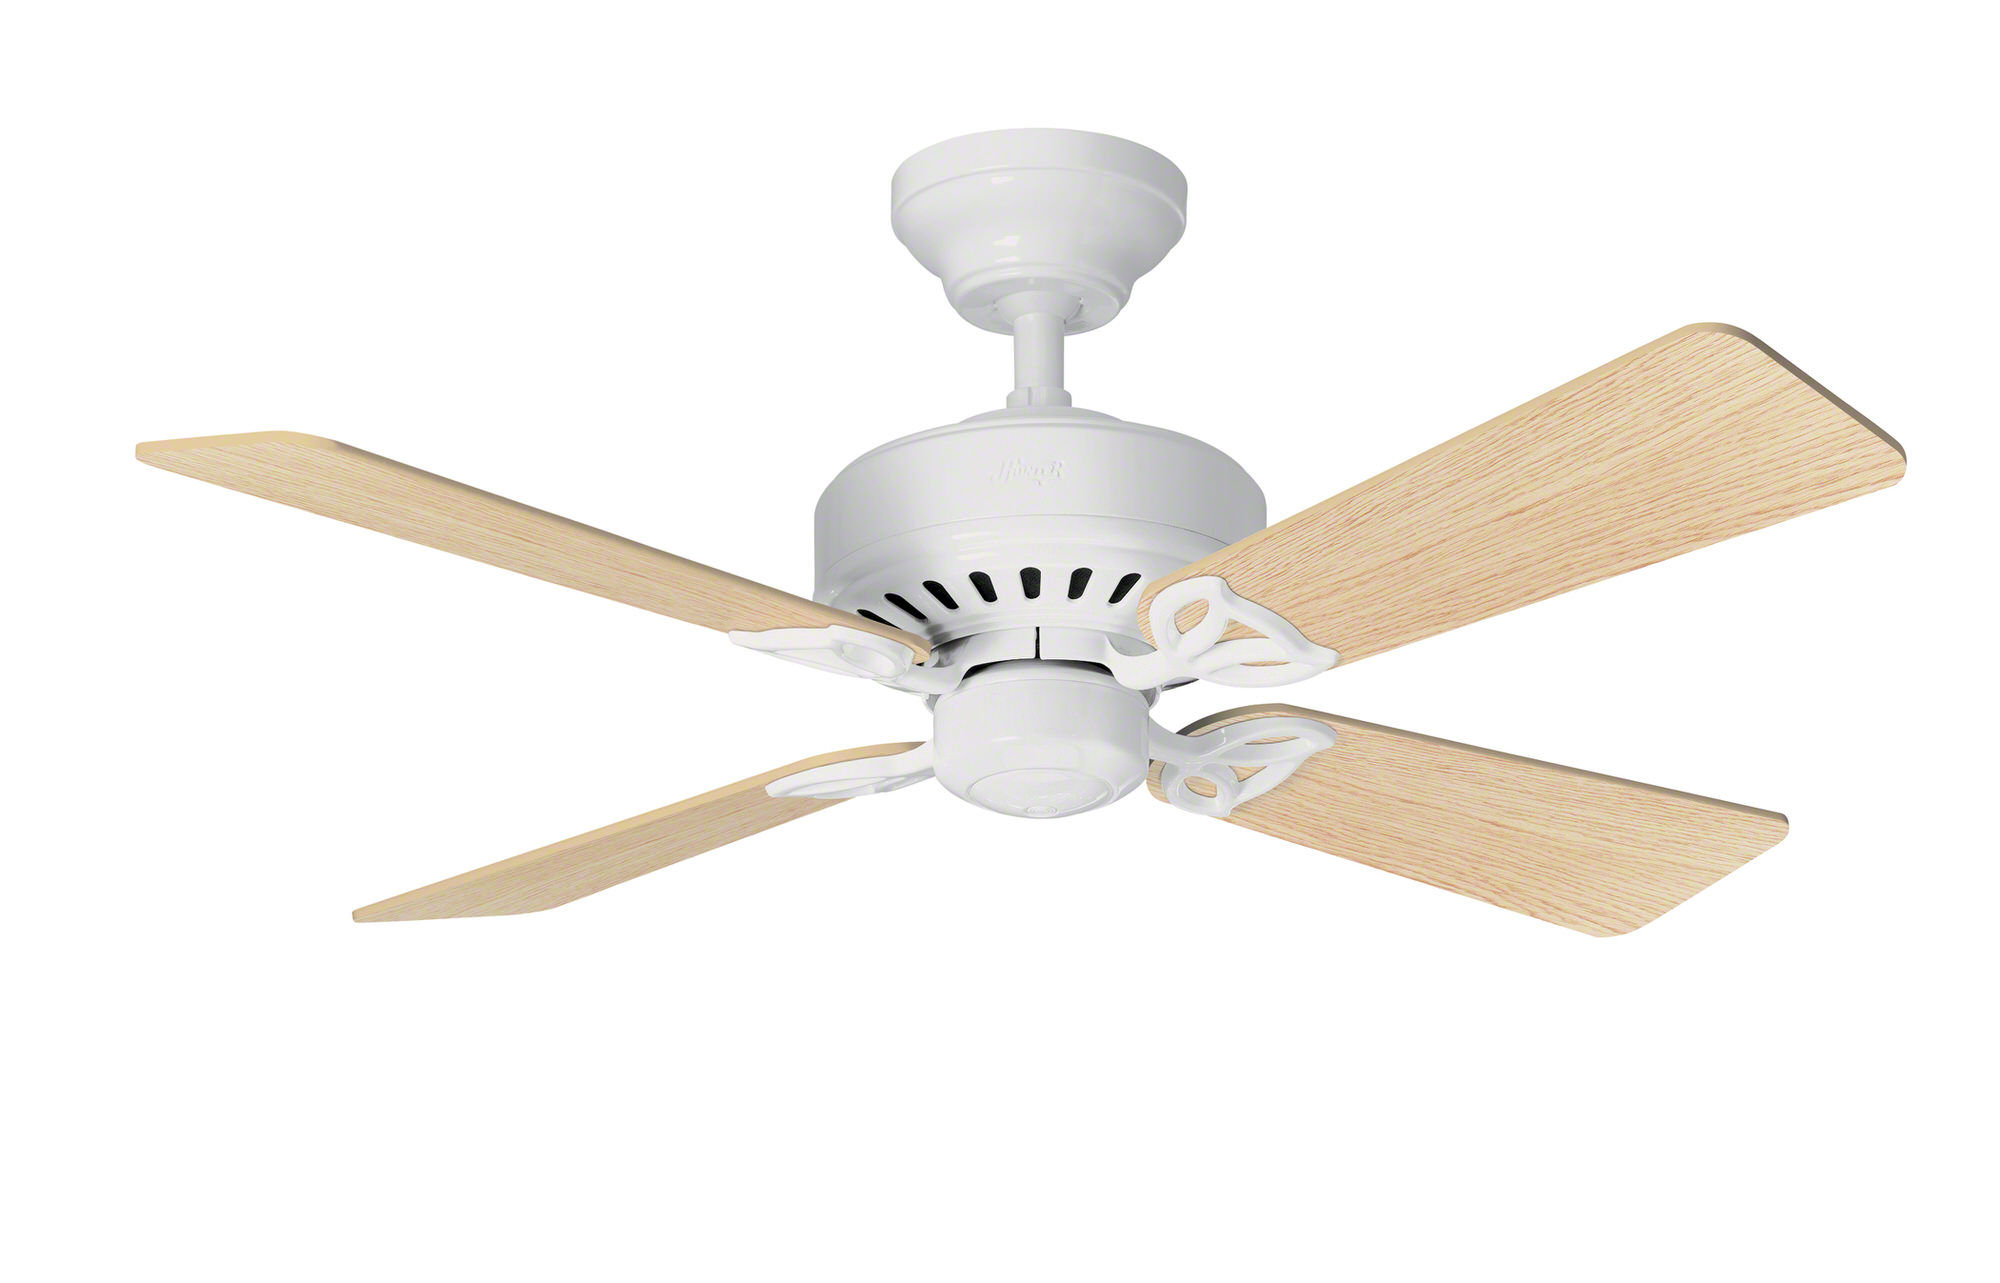 Lights For Hunter Ceiling Fans : Hunter 44 Dempsey Low Profile With Light Fresh White Ceiling Fan With Light With Handheld Remote Walmart Com Walmart Com - In no event shall hunter fan company be liable for direct, indirect, special consequential or incidental damages in excess of the purchase price of the air purifier.